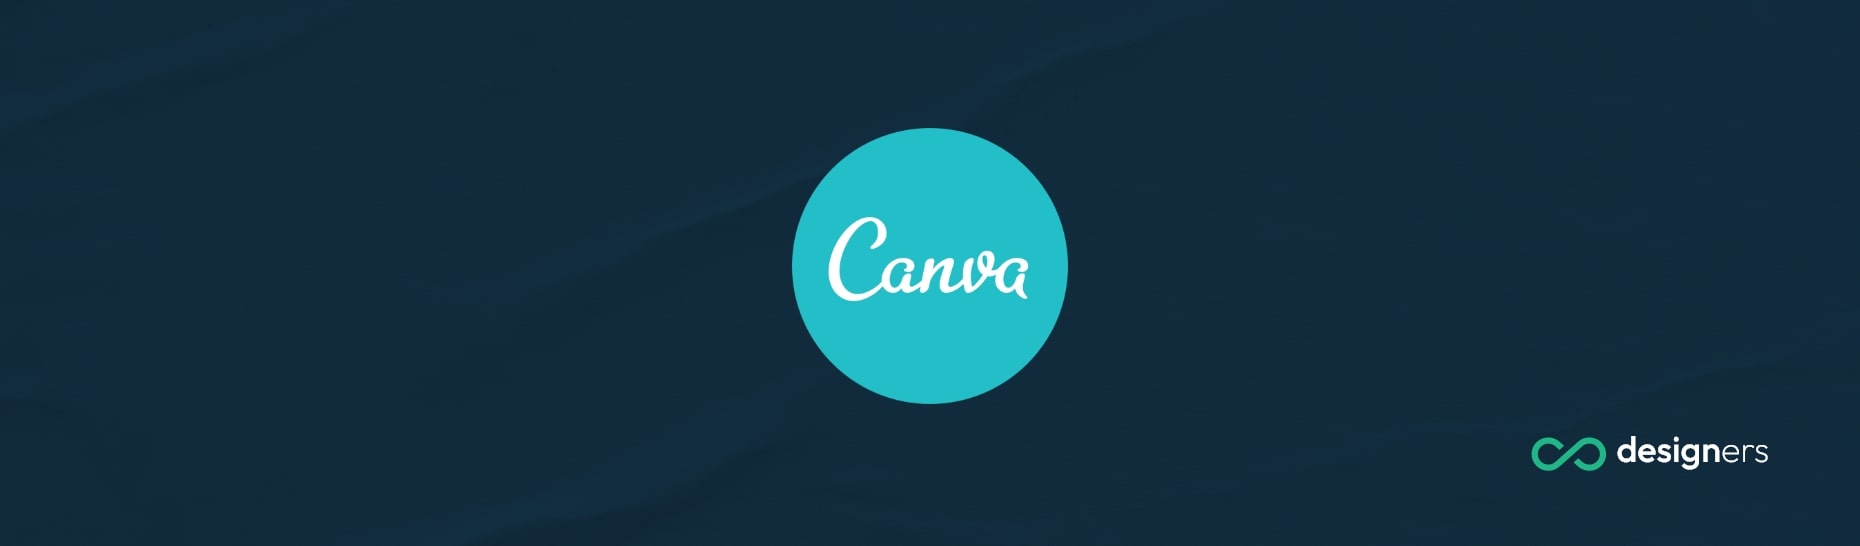 Is Canva Good for Editing?